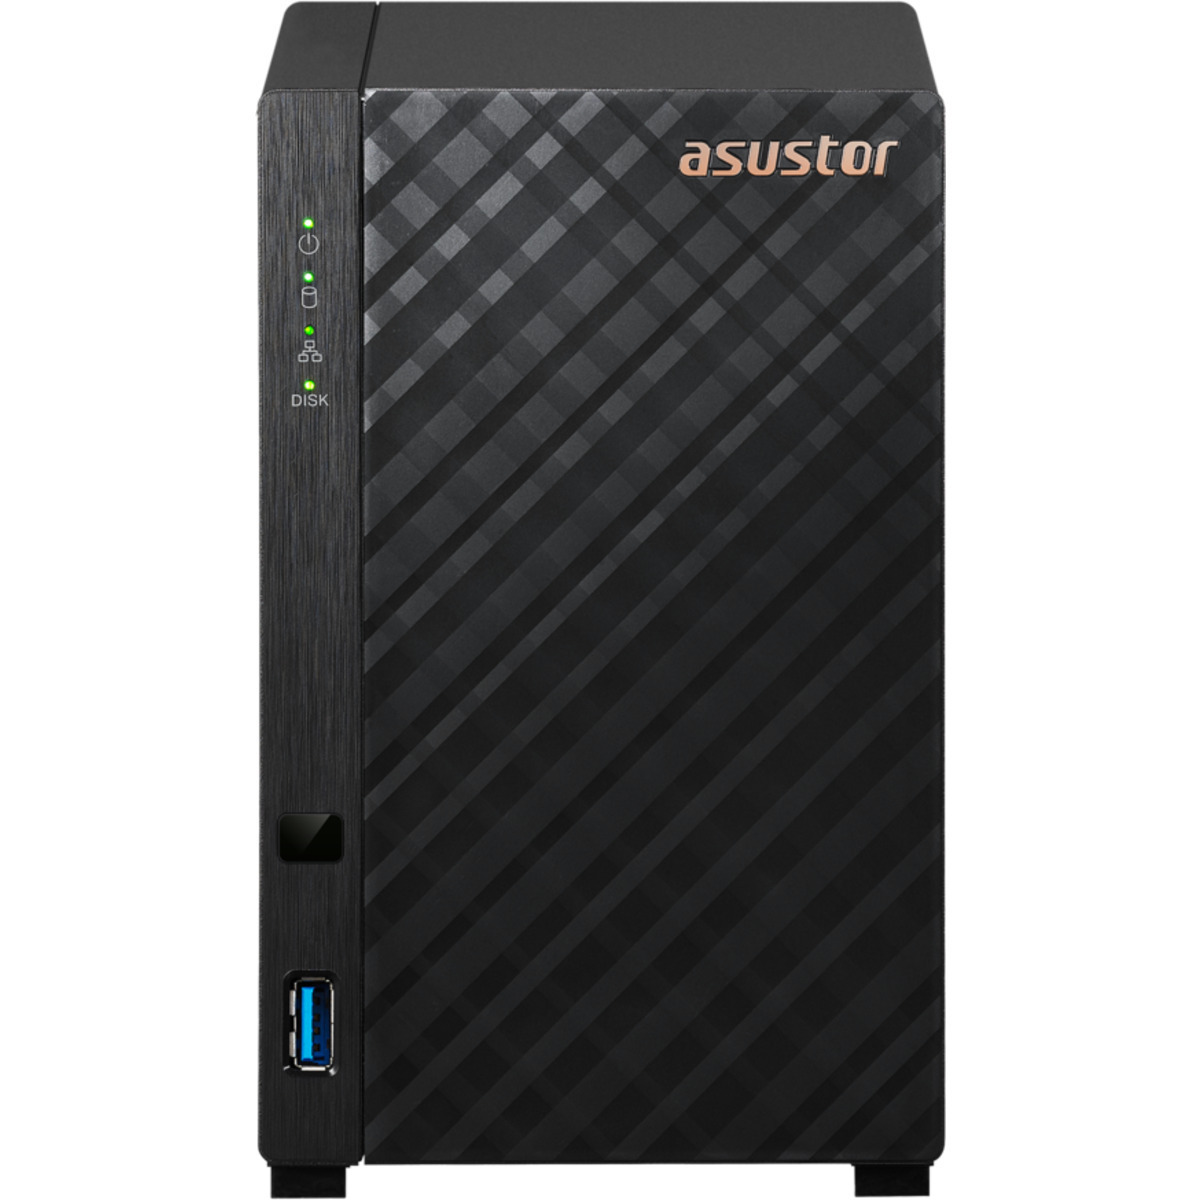 ASUSTOR DRIVESTOR 2 Lite AS1102TL 8tb 2-Bay Desktop Personal / Basic Home / Small Office NAS - Network Attached Storage Device 2x4tb Toshiba MN Series MN08ADA400E 3.5 7200rpm SATA 6Gb/s HDD NAS Class Drives Installed - Burn-In Tested - ON SALE DRIVESTOR 2 Lite AS1102TL